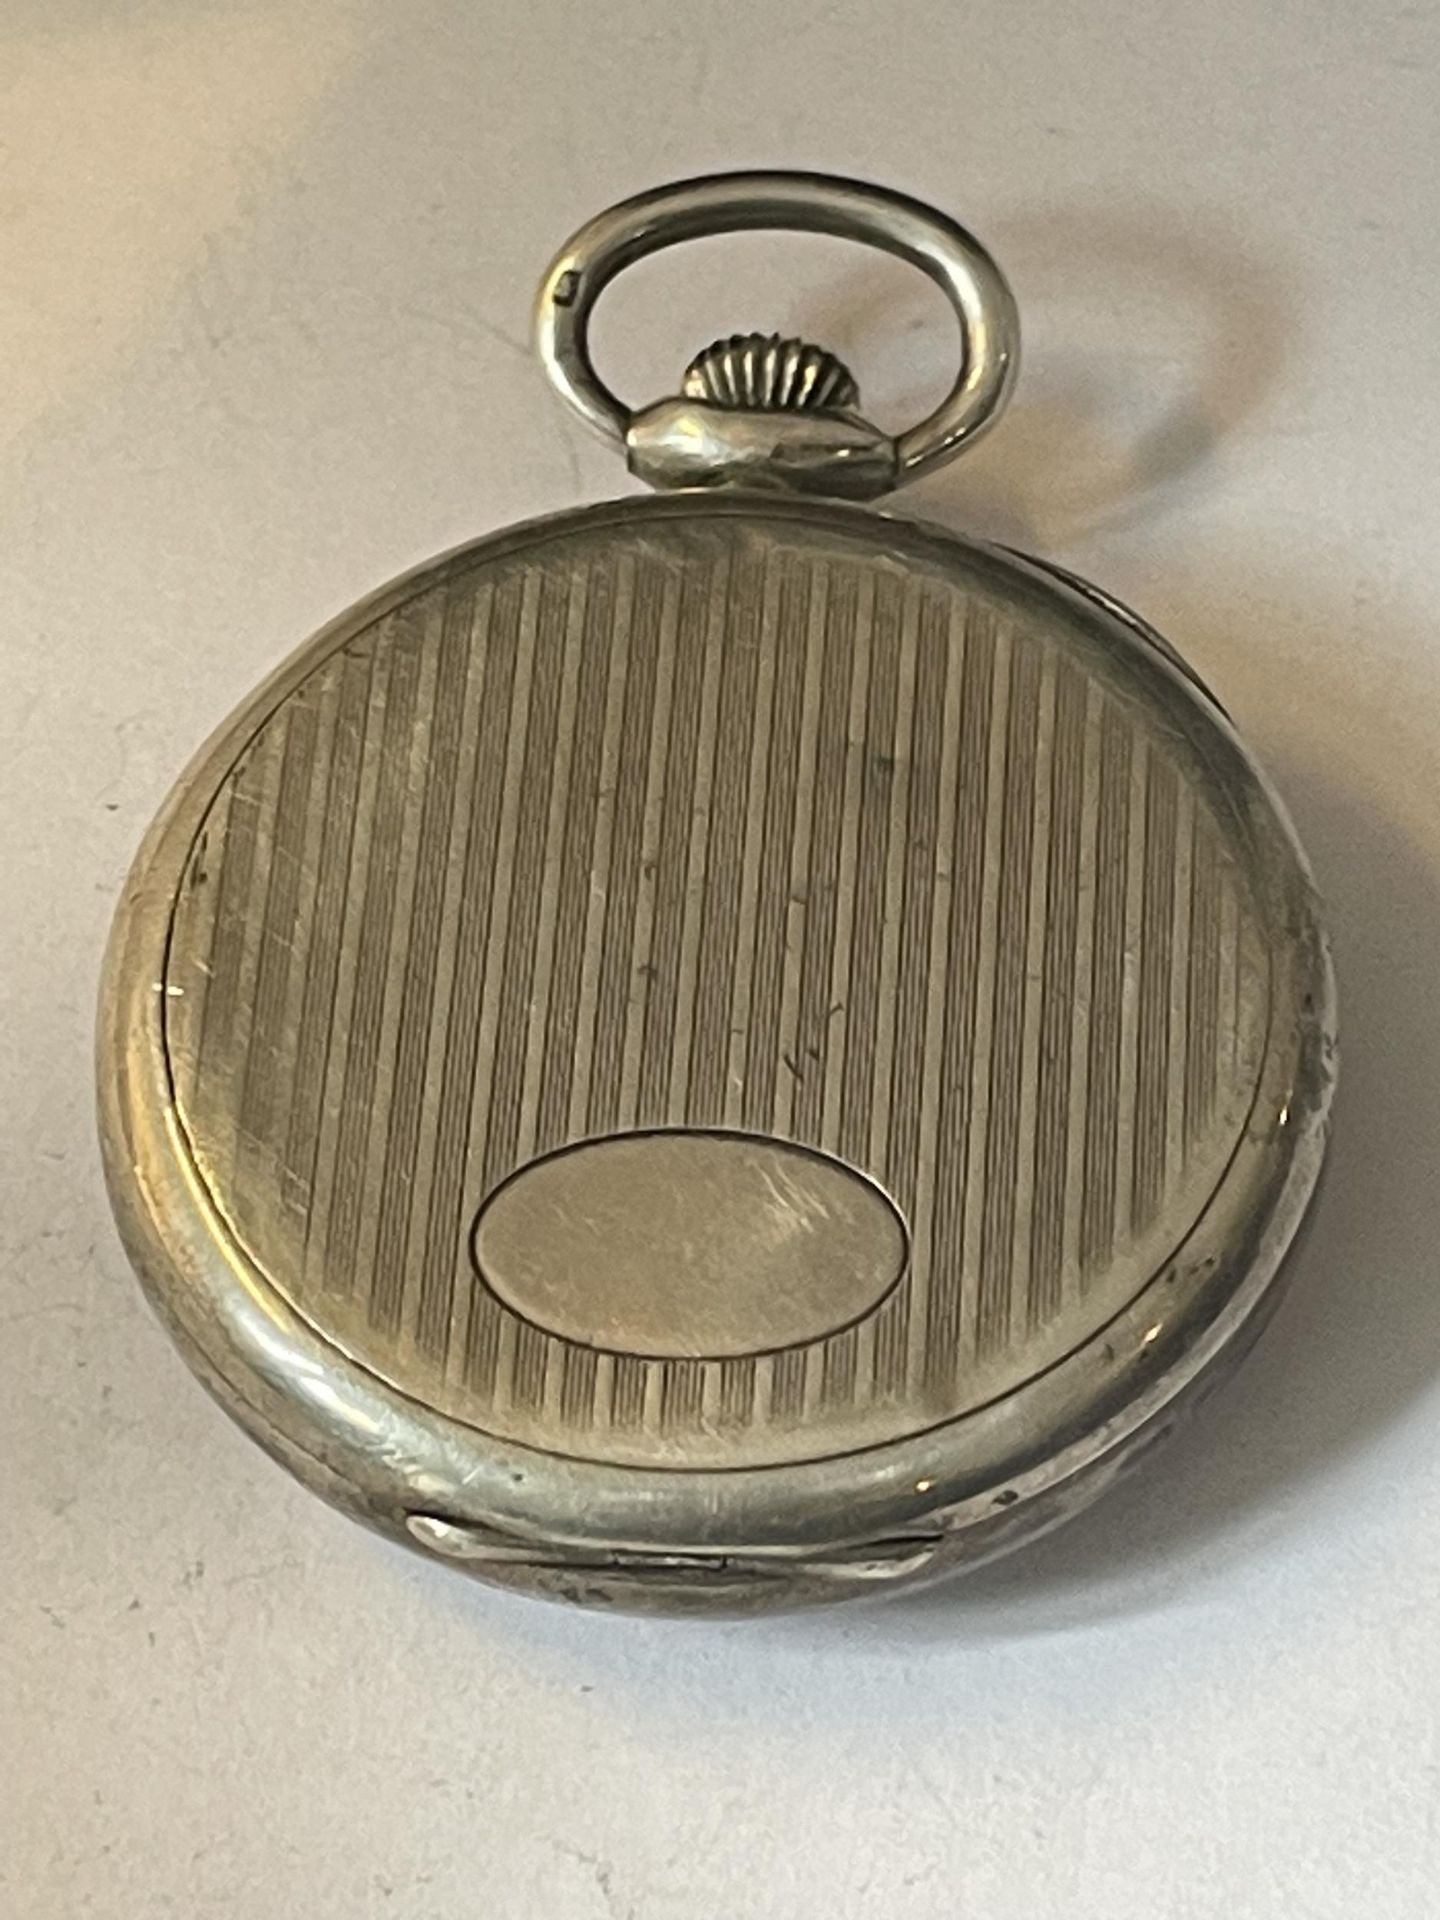 A SILVER ZENITH POCKET WATCH SEEN WORKING BUT NO WARRANTY - Image 2 of 3